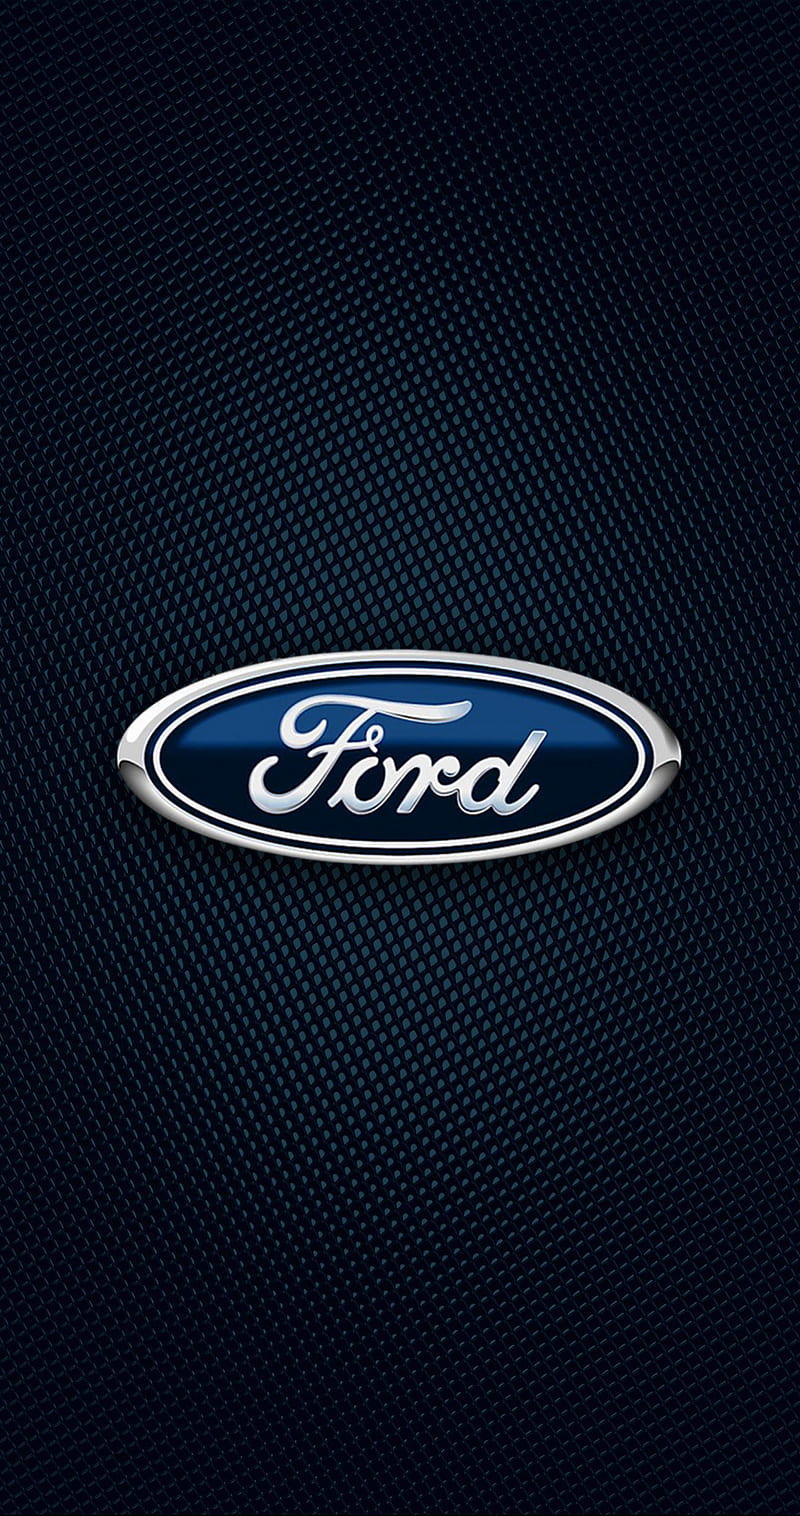 Share more than 84 wallpaper ford best - in.coedo.com.vn